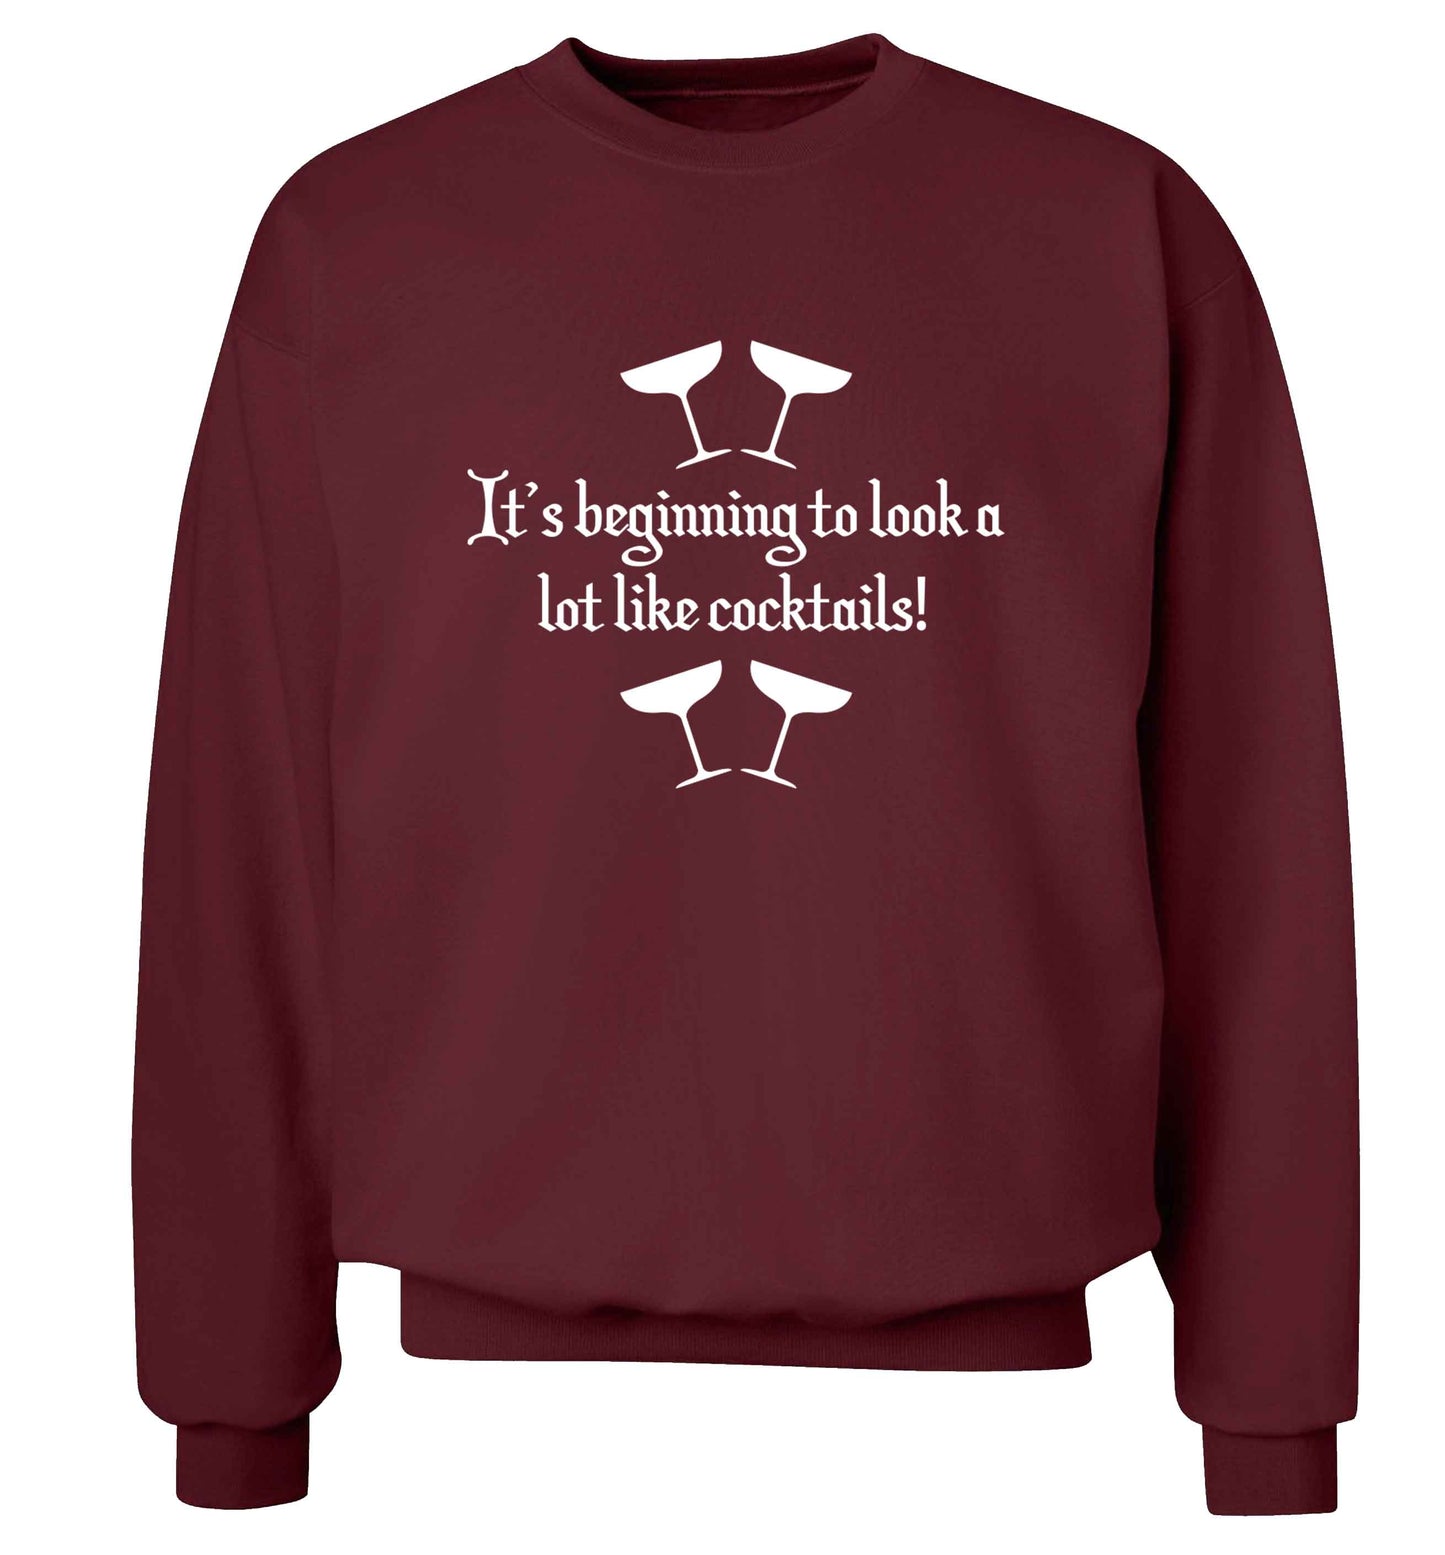 It's beginning to look a lot like cocktails Adult's unisex maroon Sweater 2XL